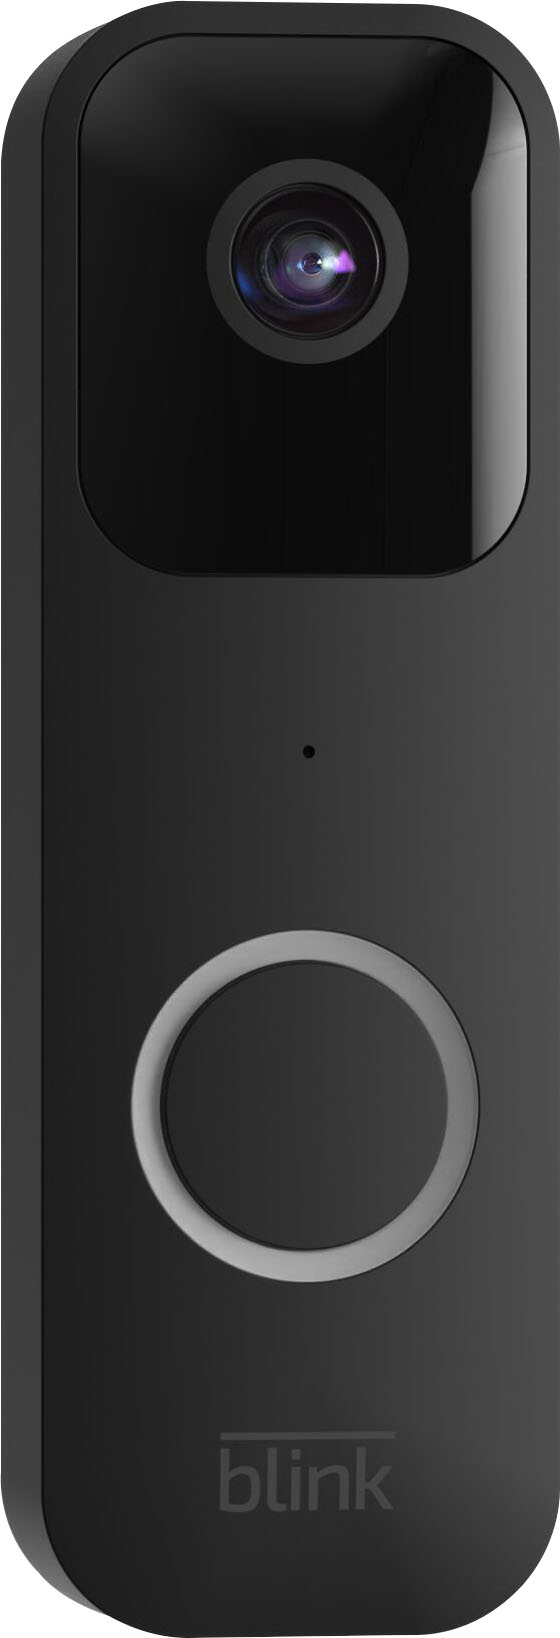 Angle View: Ring - Video Doorbell 4 - Smart Wi-Fi Video Doorbell - Wired/Battery Operated - Satin Nickel